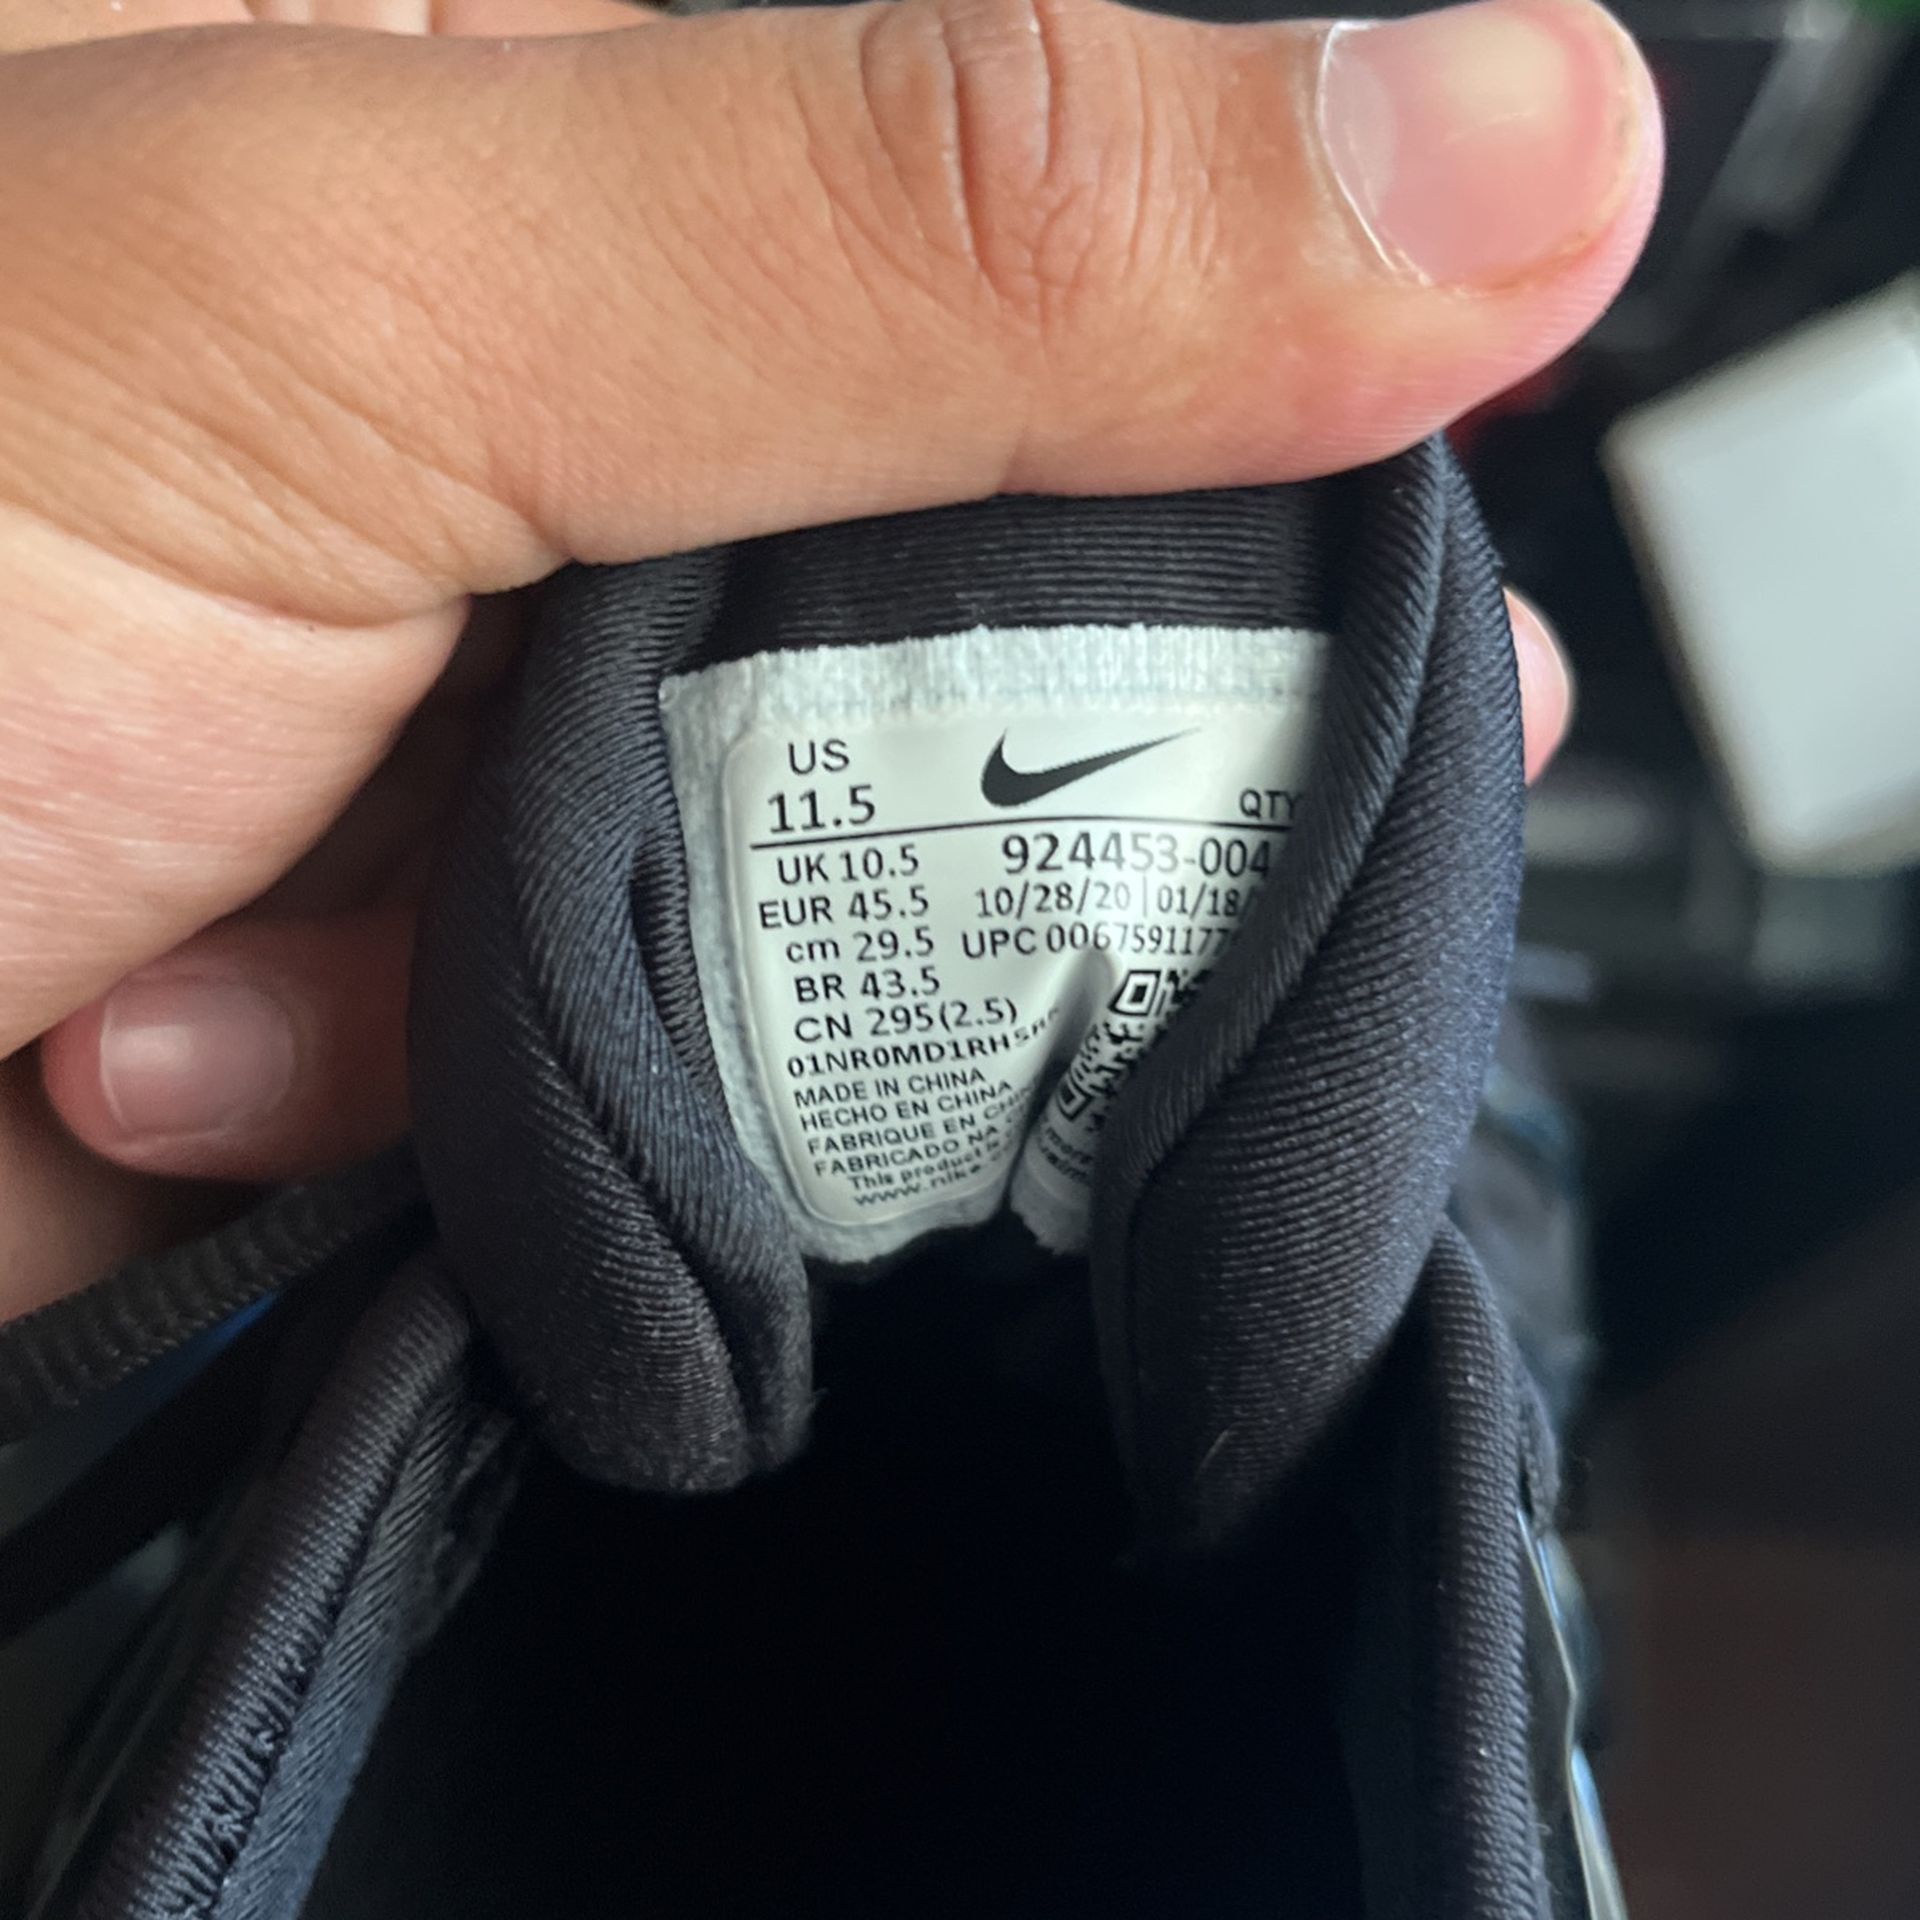 nike vapor maxes all black size 11.5 for Sale in San Pedro, CA - OfferUp